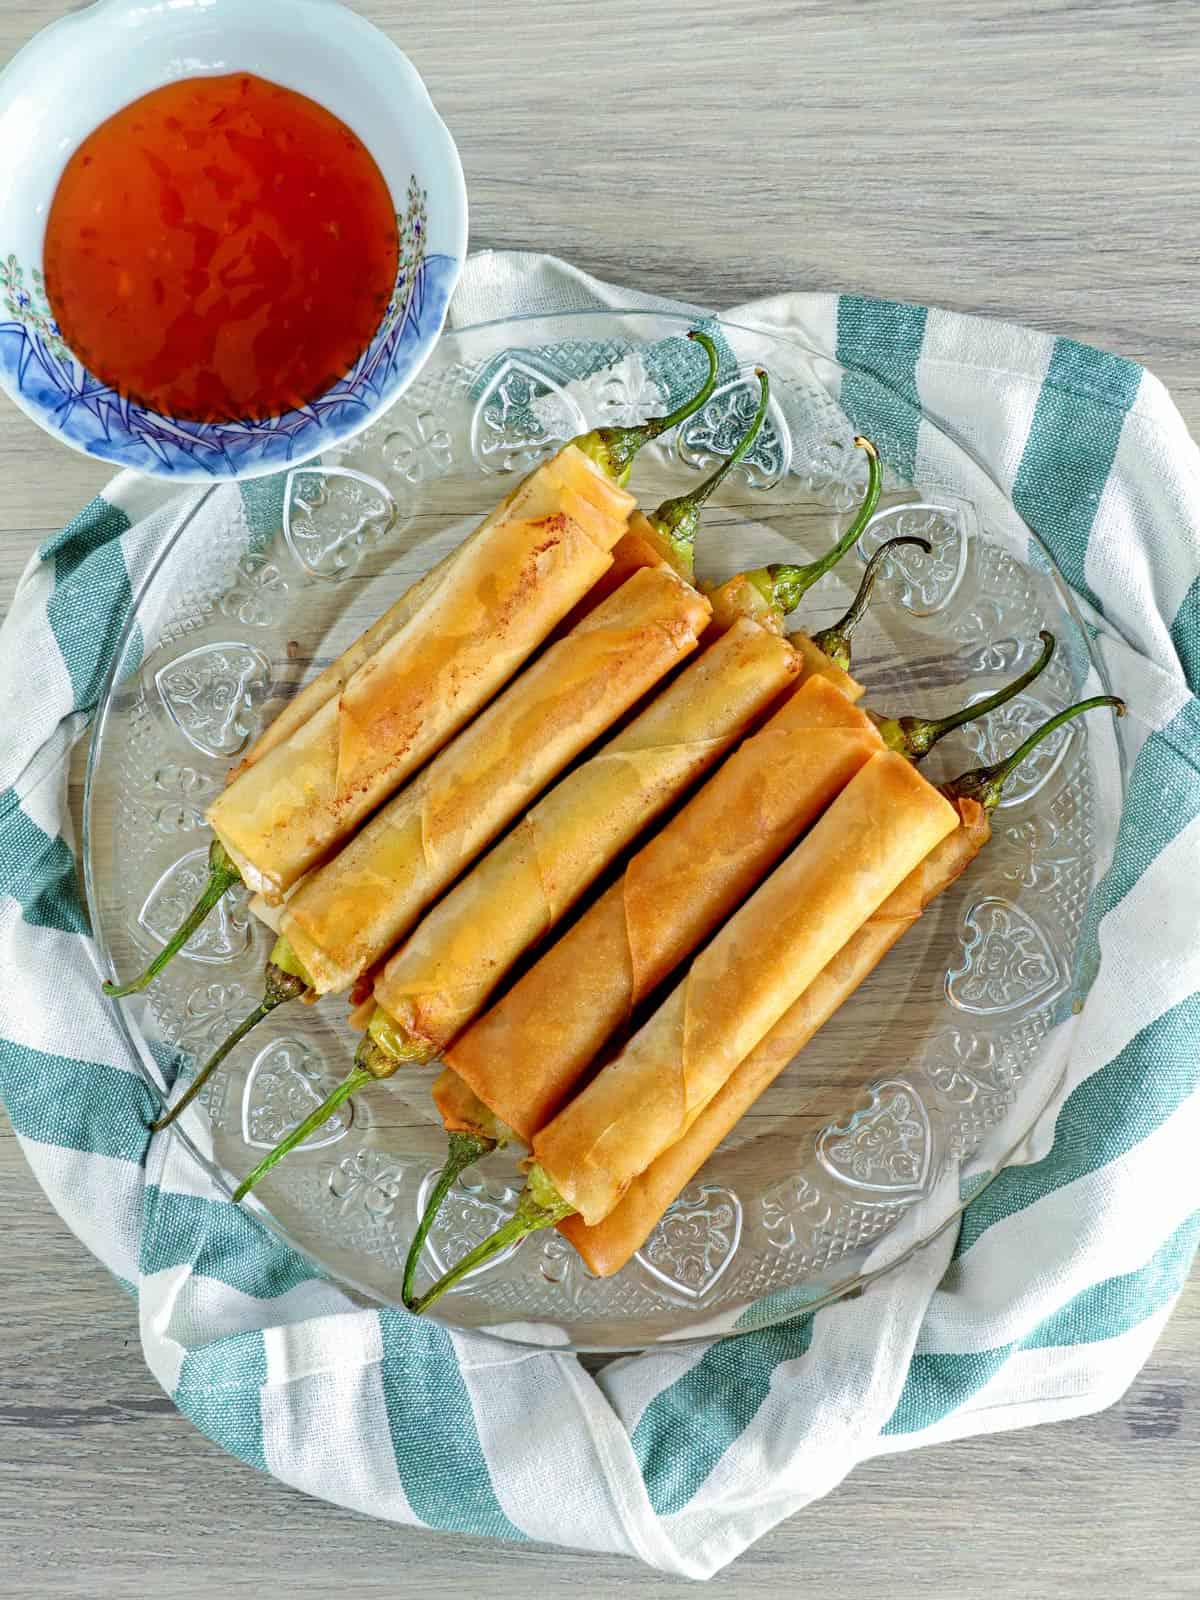 lumpia with chili pepper and ground pork filling